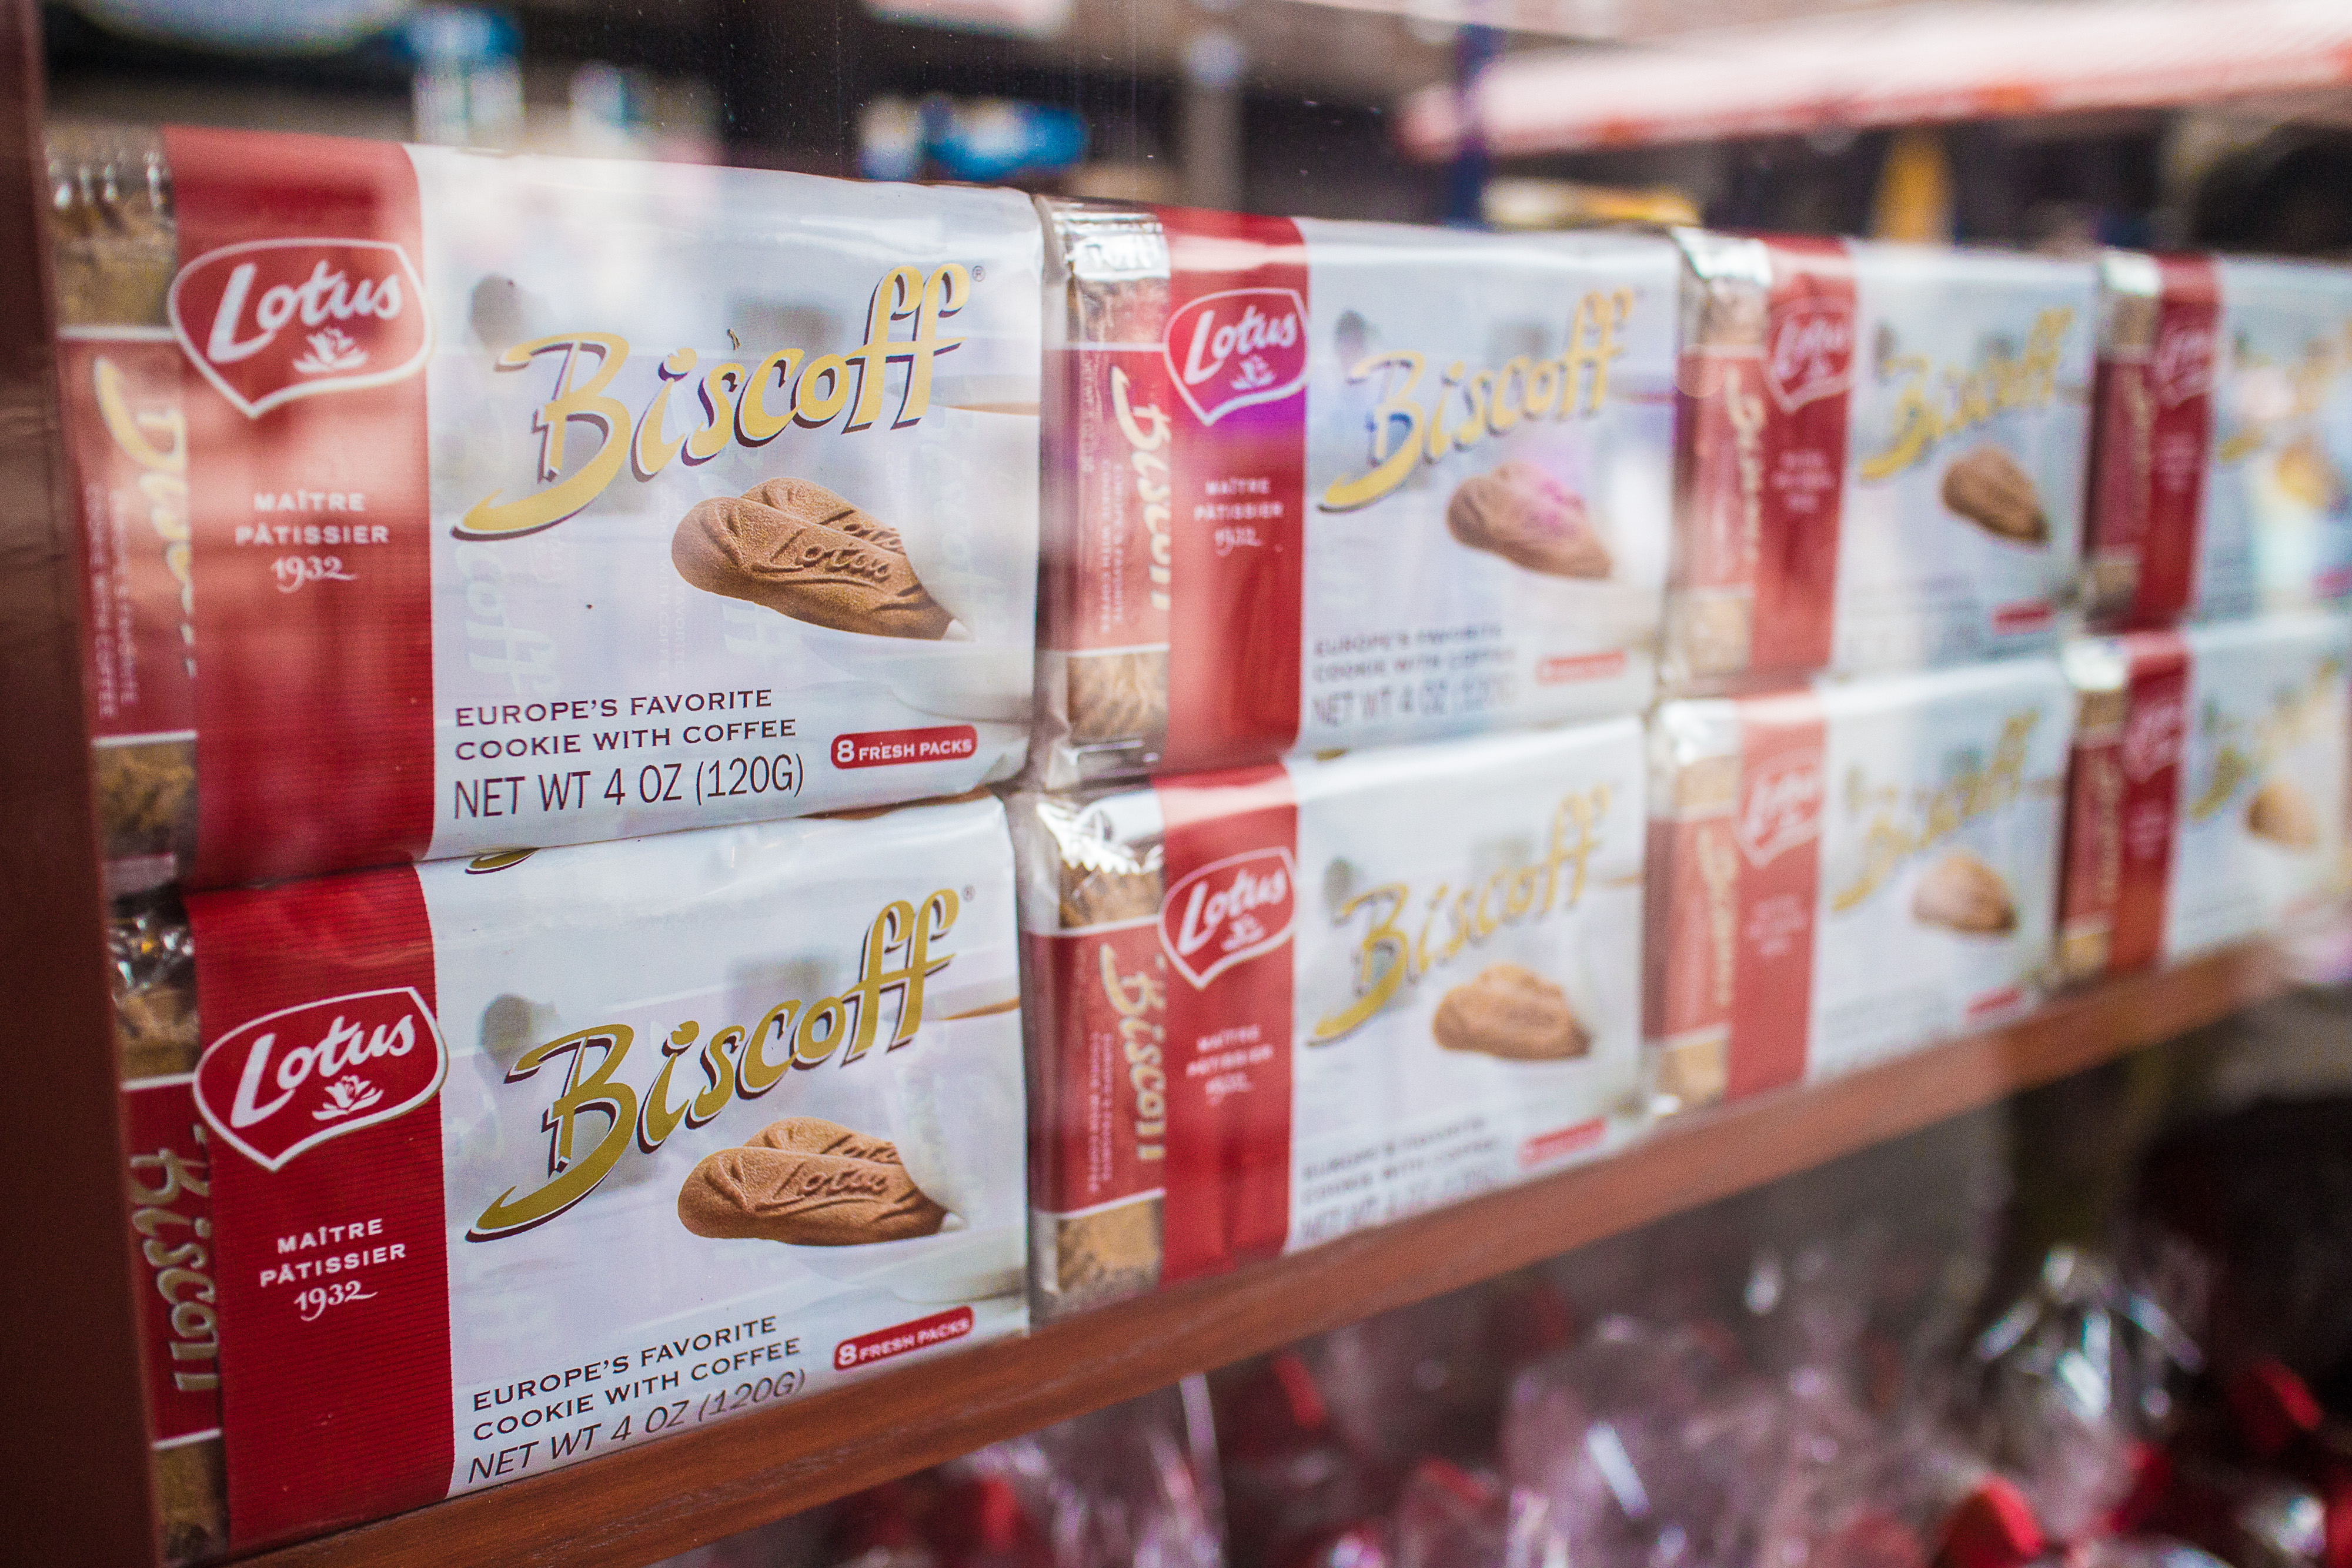 Biscoff rebrand sees core name take greater prominence